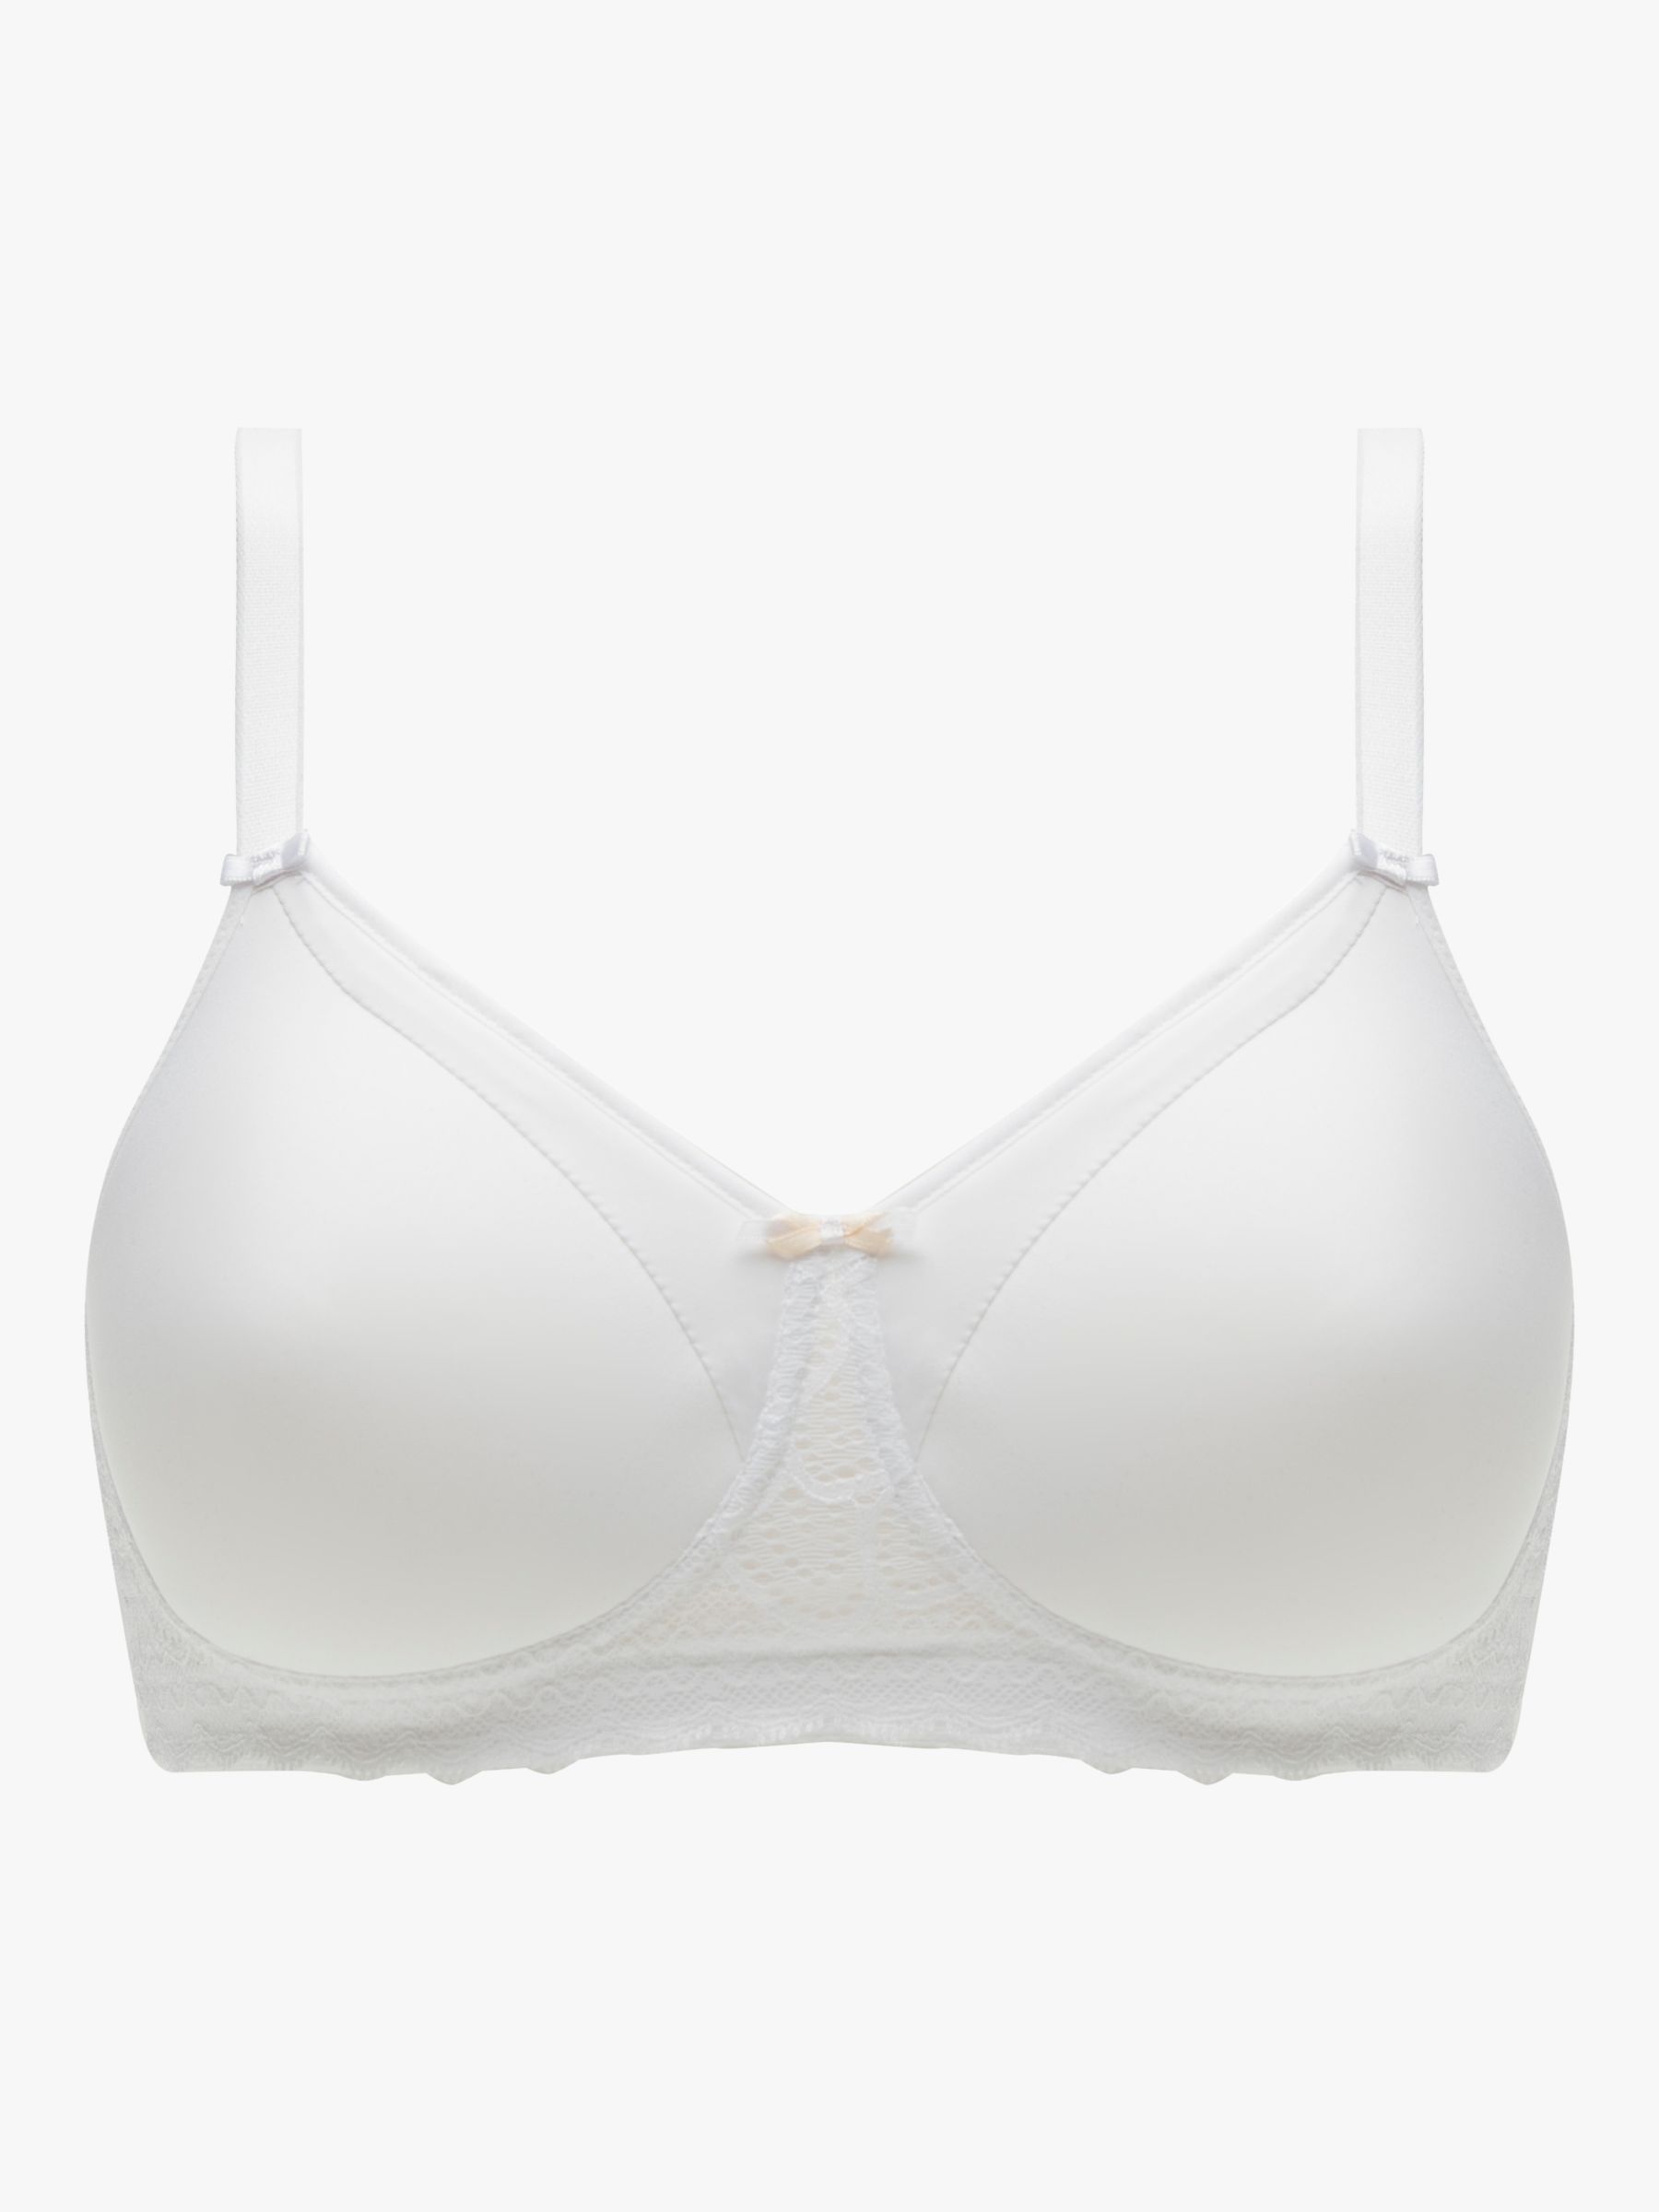 Buy Chantelle Absolute Comfort Memory Foam Non Wired Bra Online at johnlewis.com